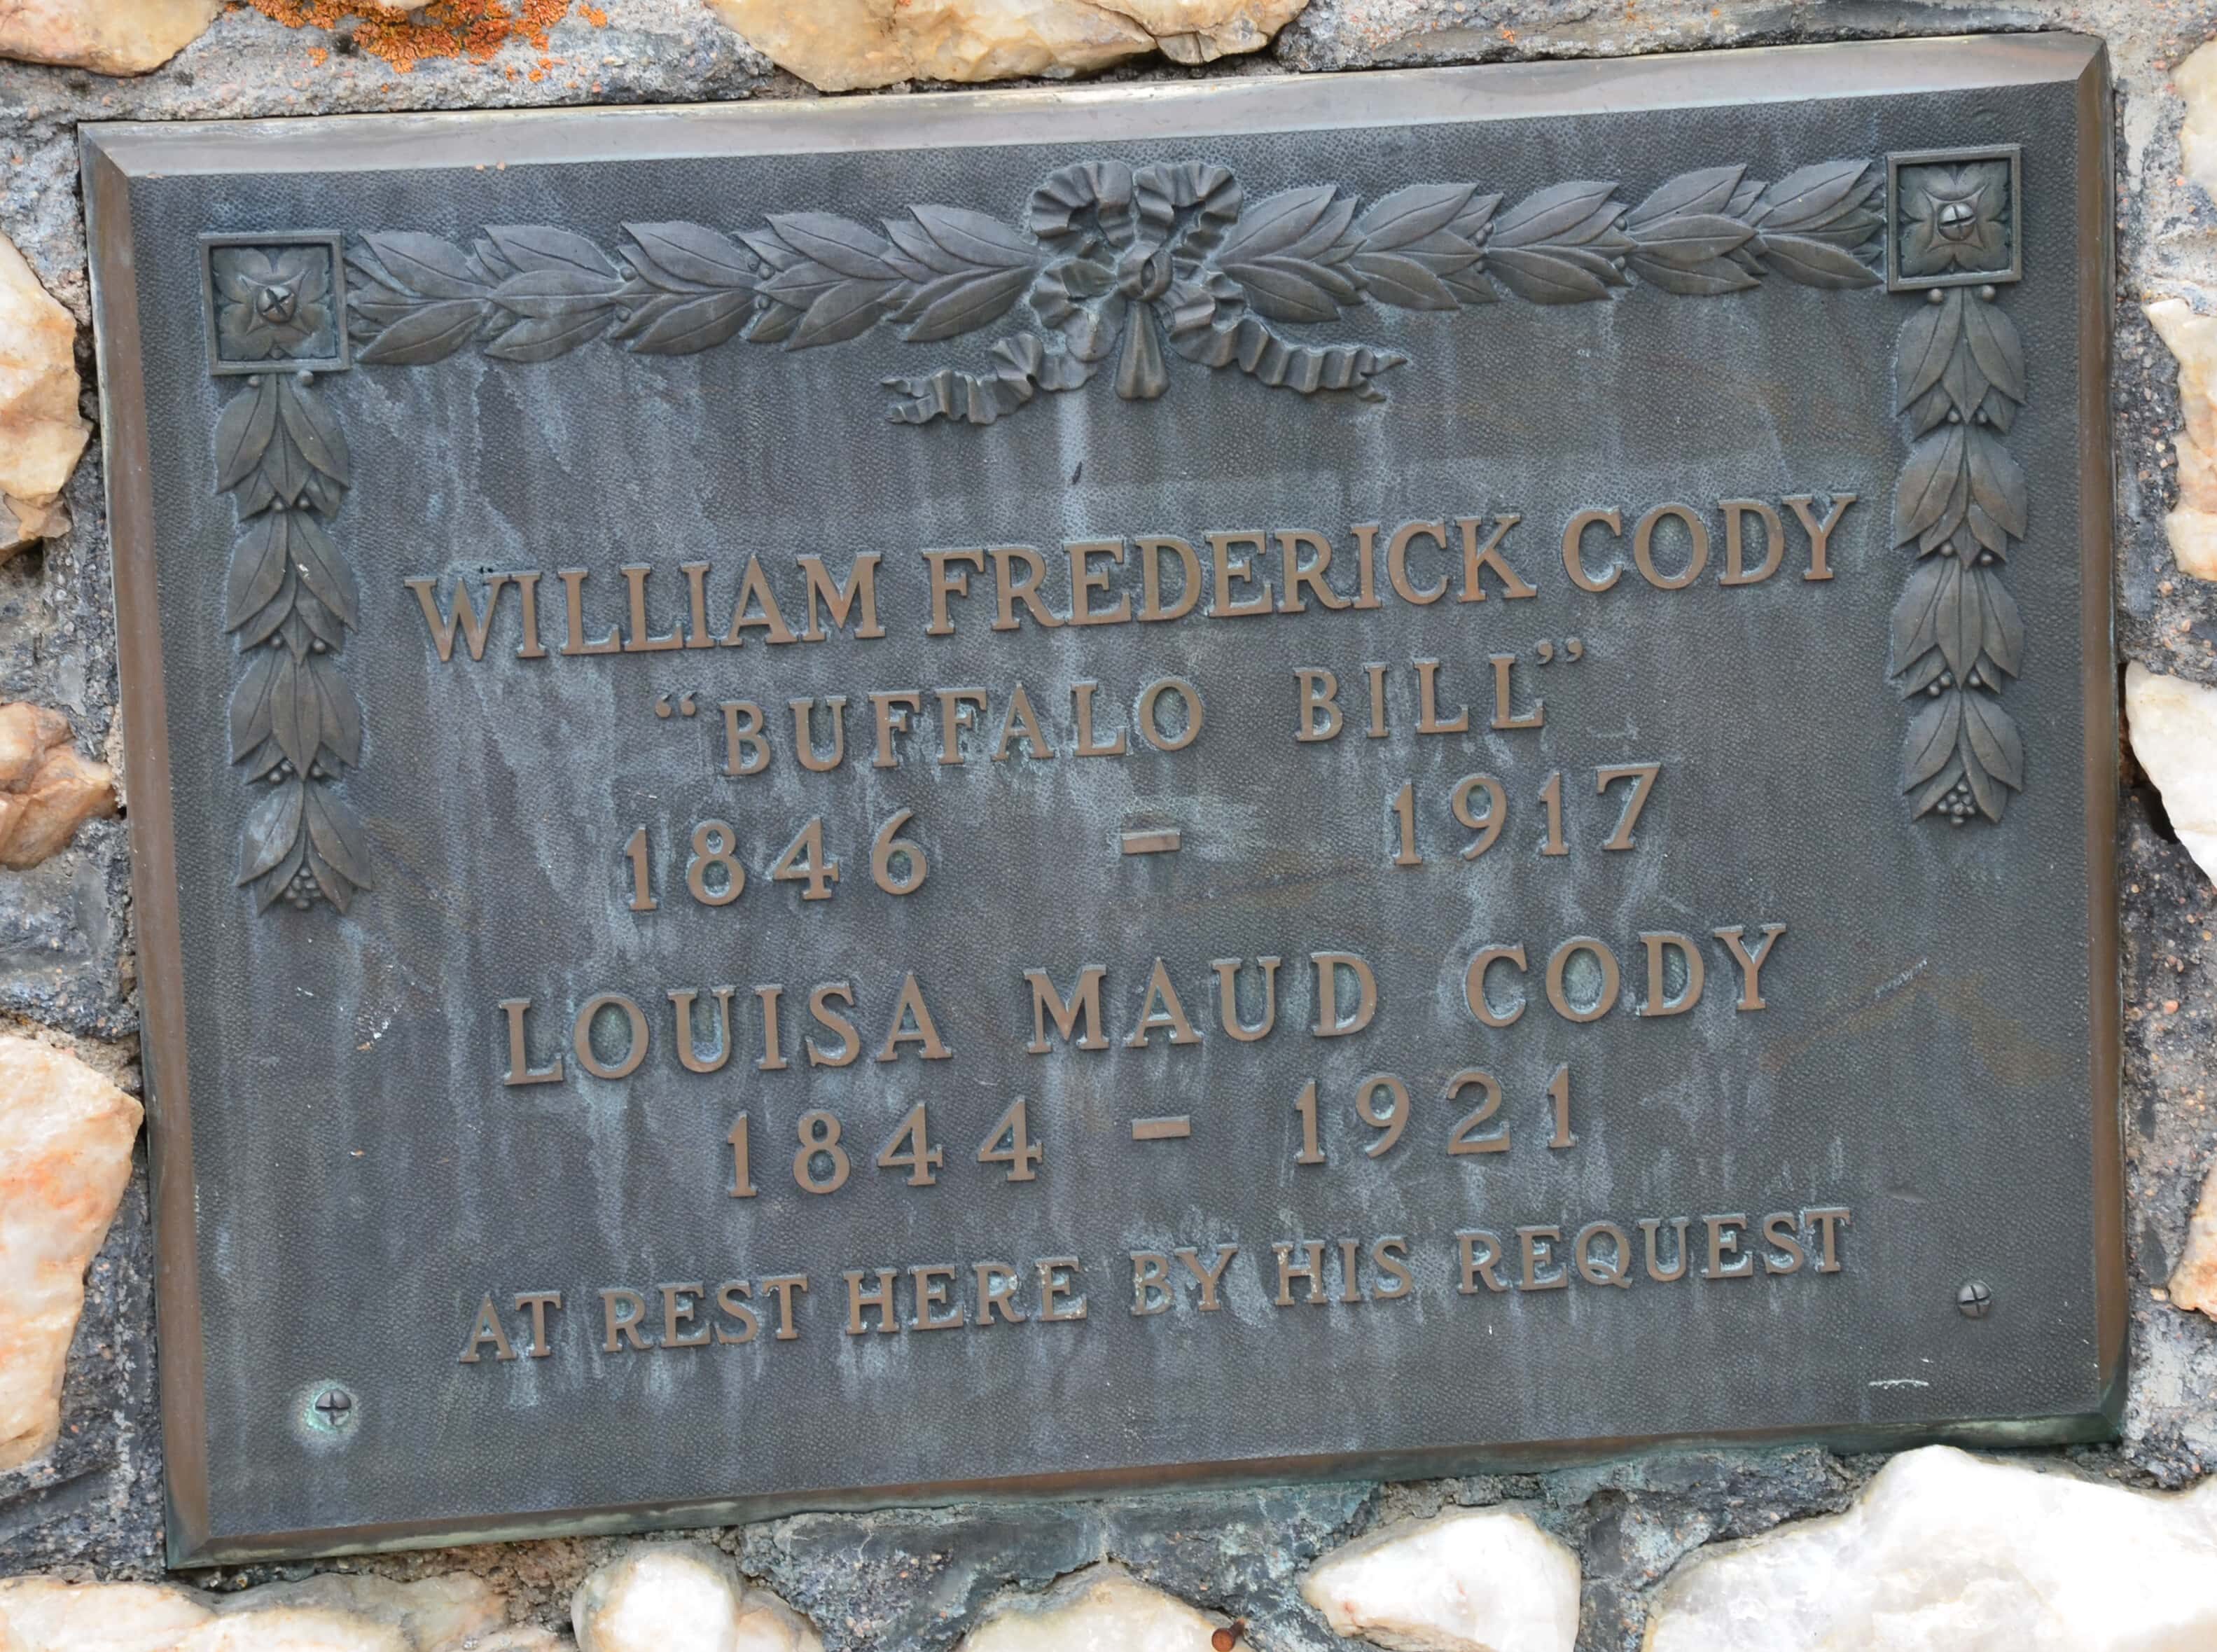 "At rest by his request" at the grave of Buffalo Bill Cody on Lookout Mountain